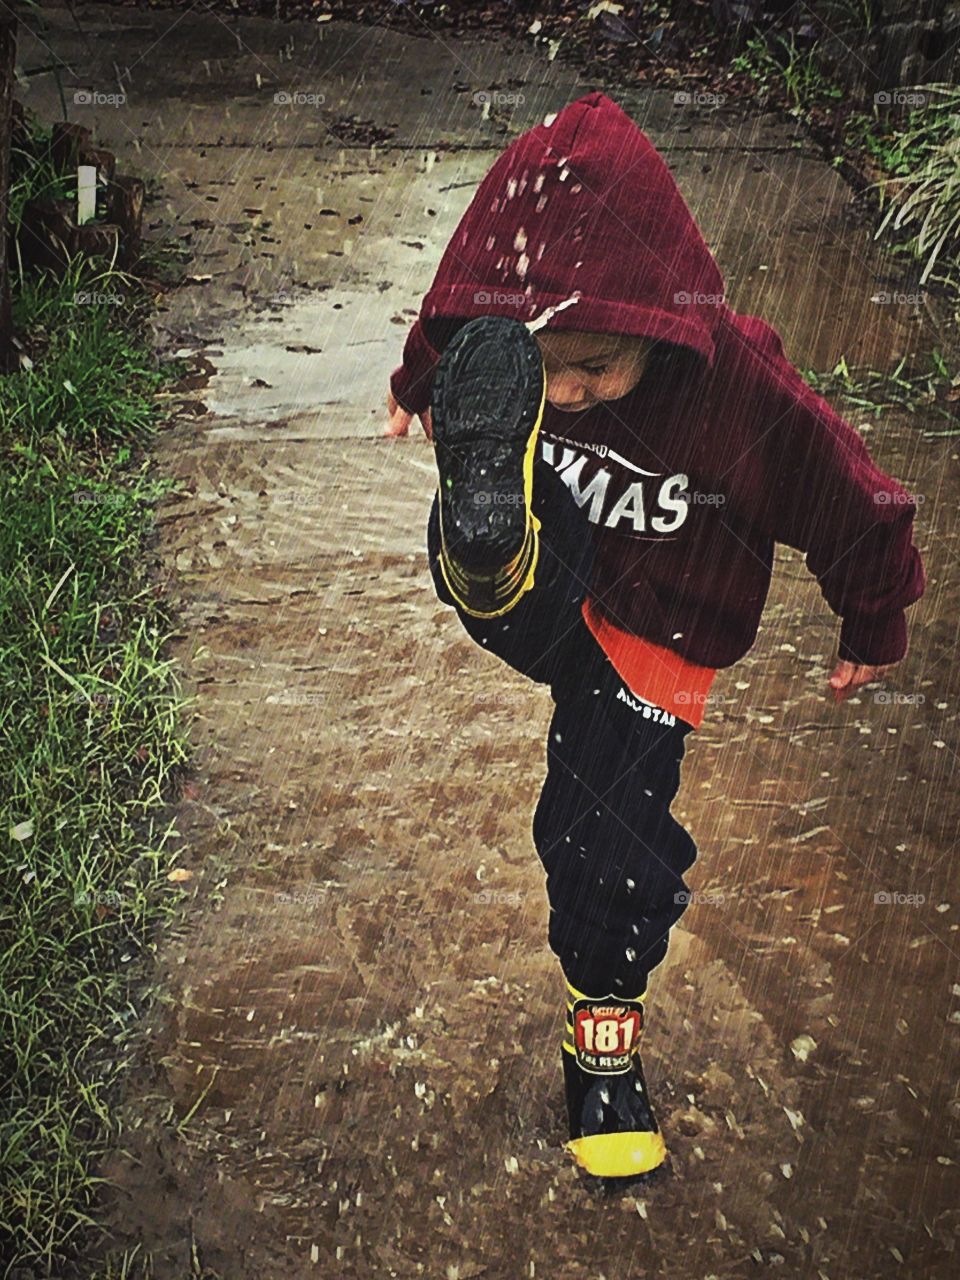 Playing in the rain puddles